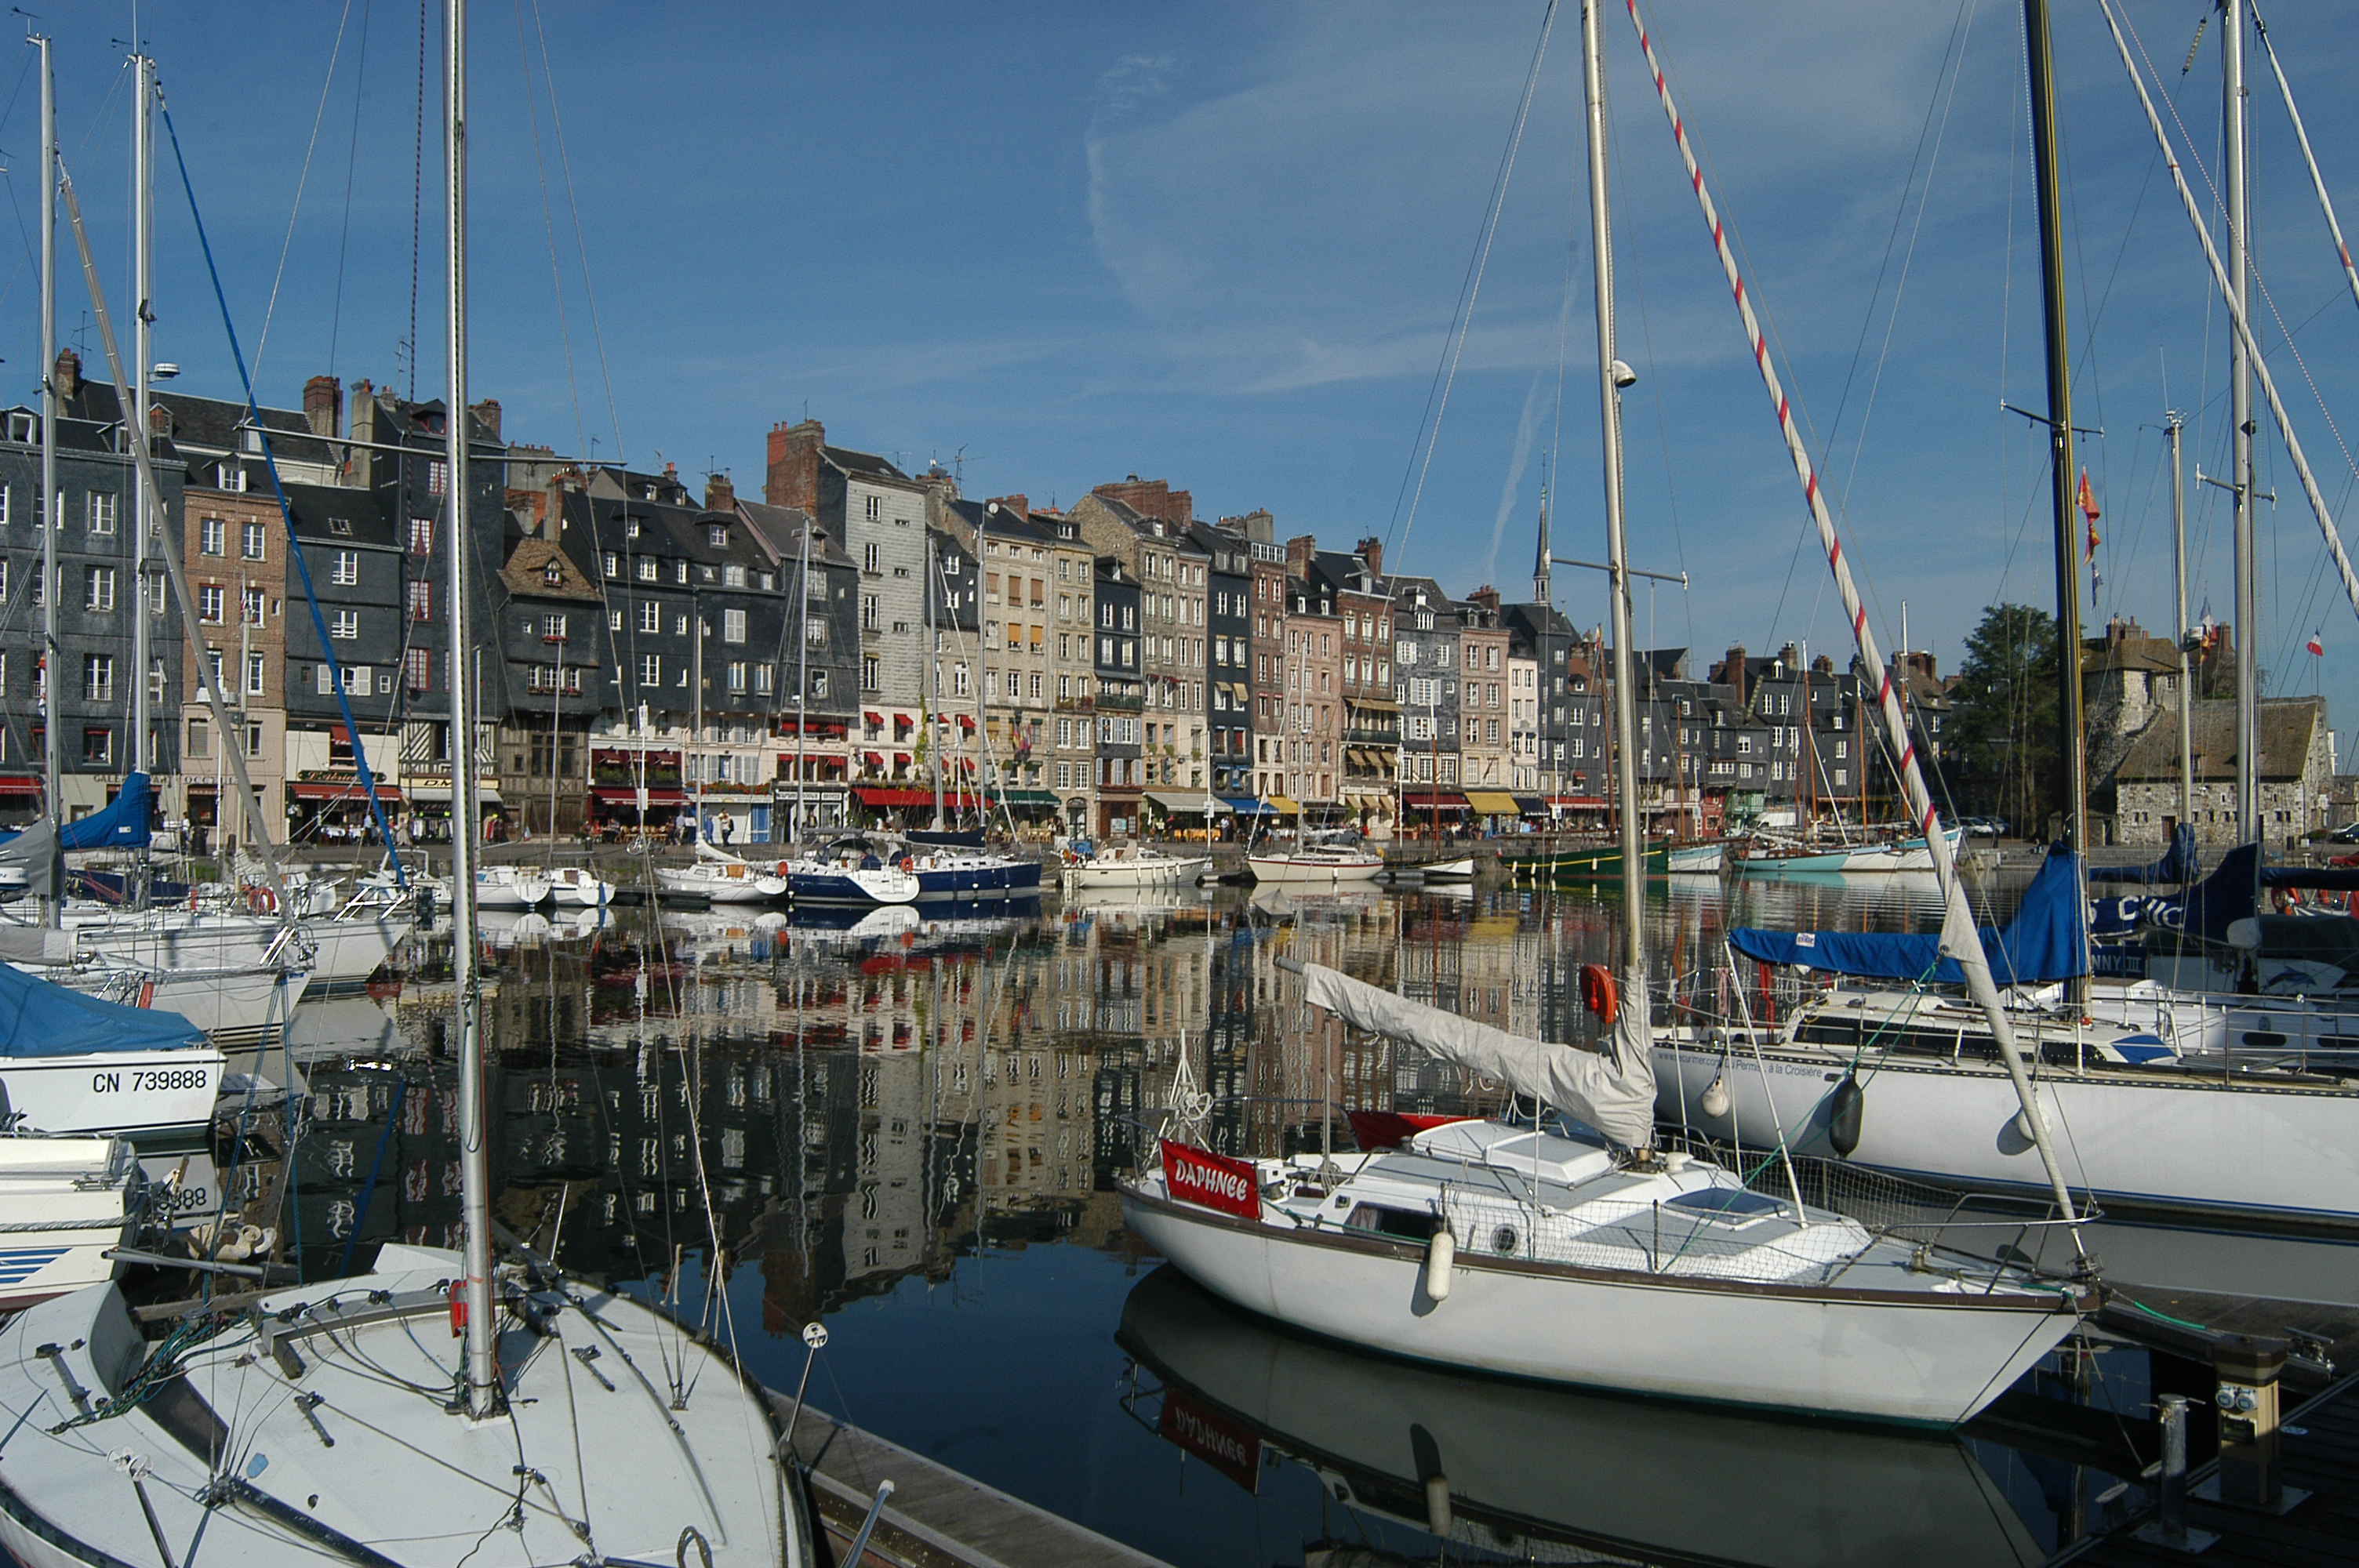 Honfleur, Normandy - Discover France Magazine - Off the beaten path